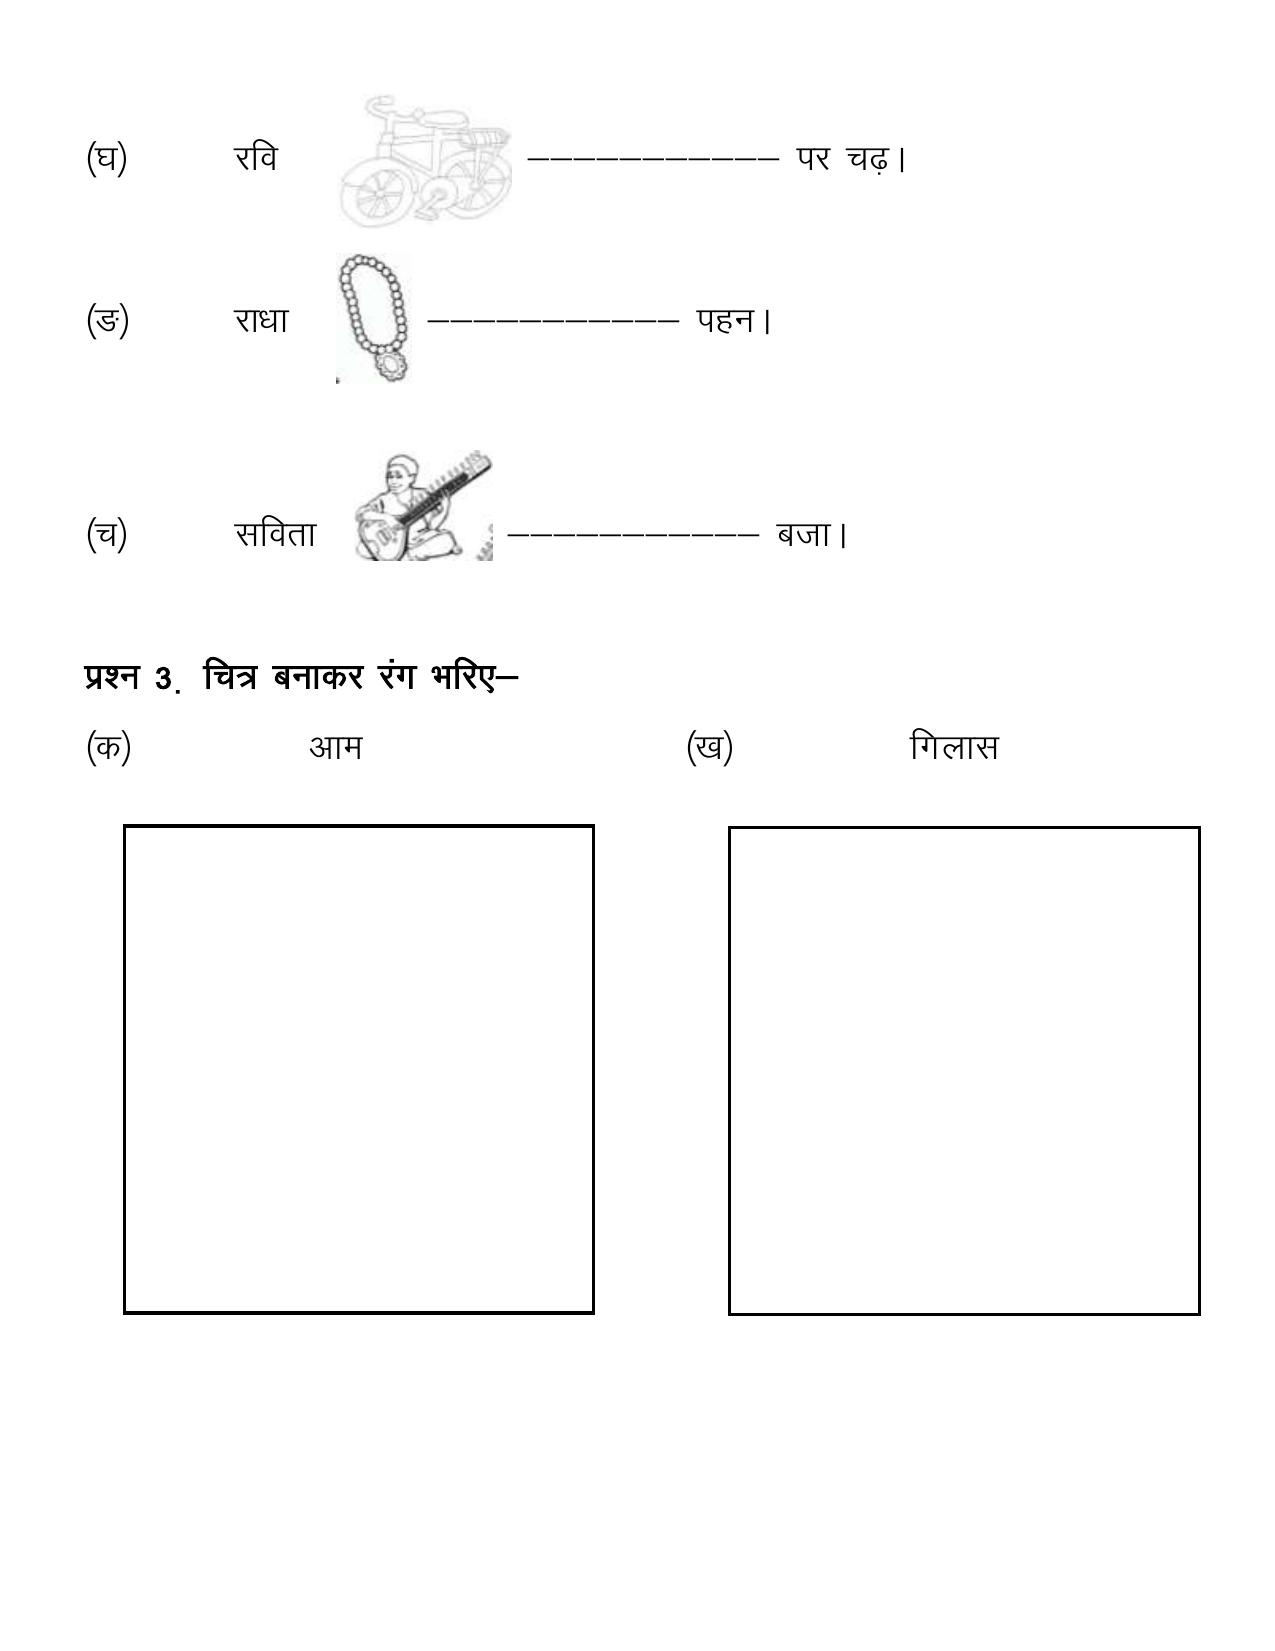 Worksheet for Class 1 Hindi Assignment 24 - Page 2